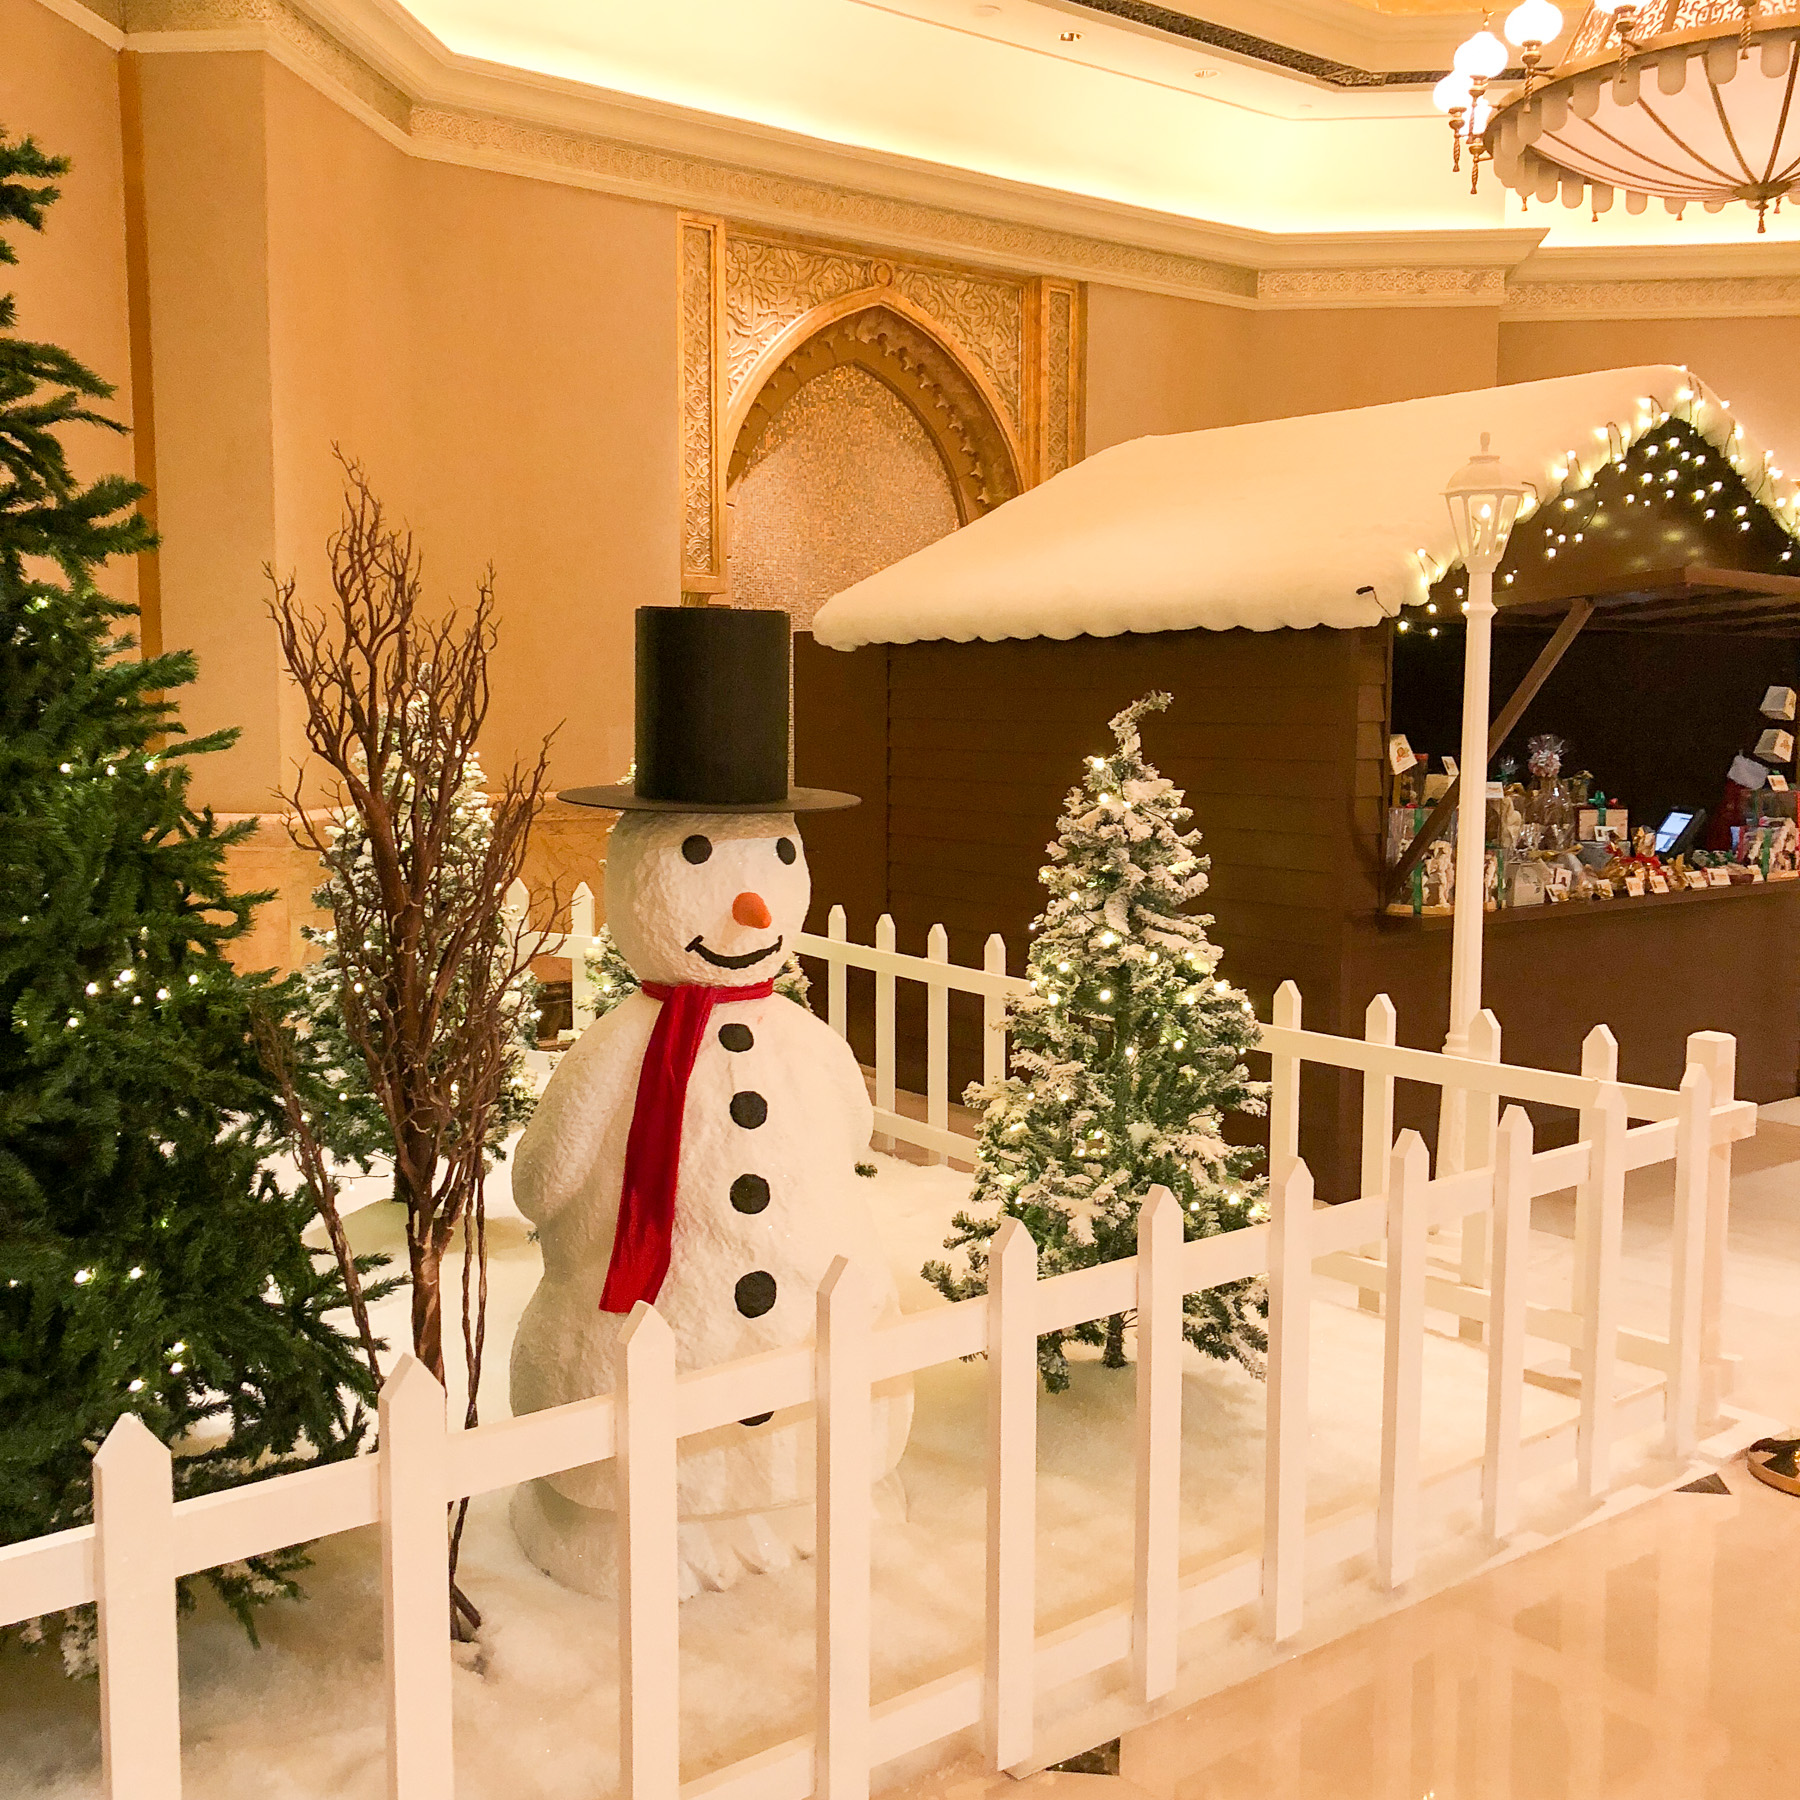 Christmas in the UAE - Emirates Palace Snowman.jpg